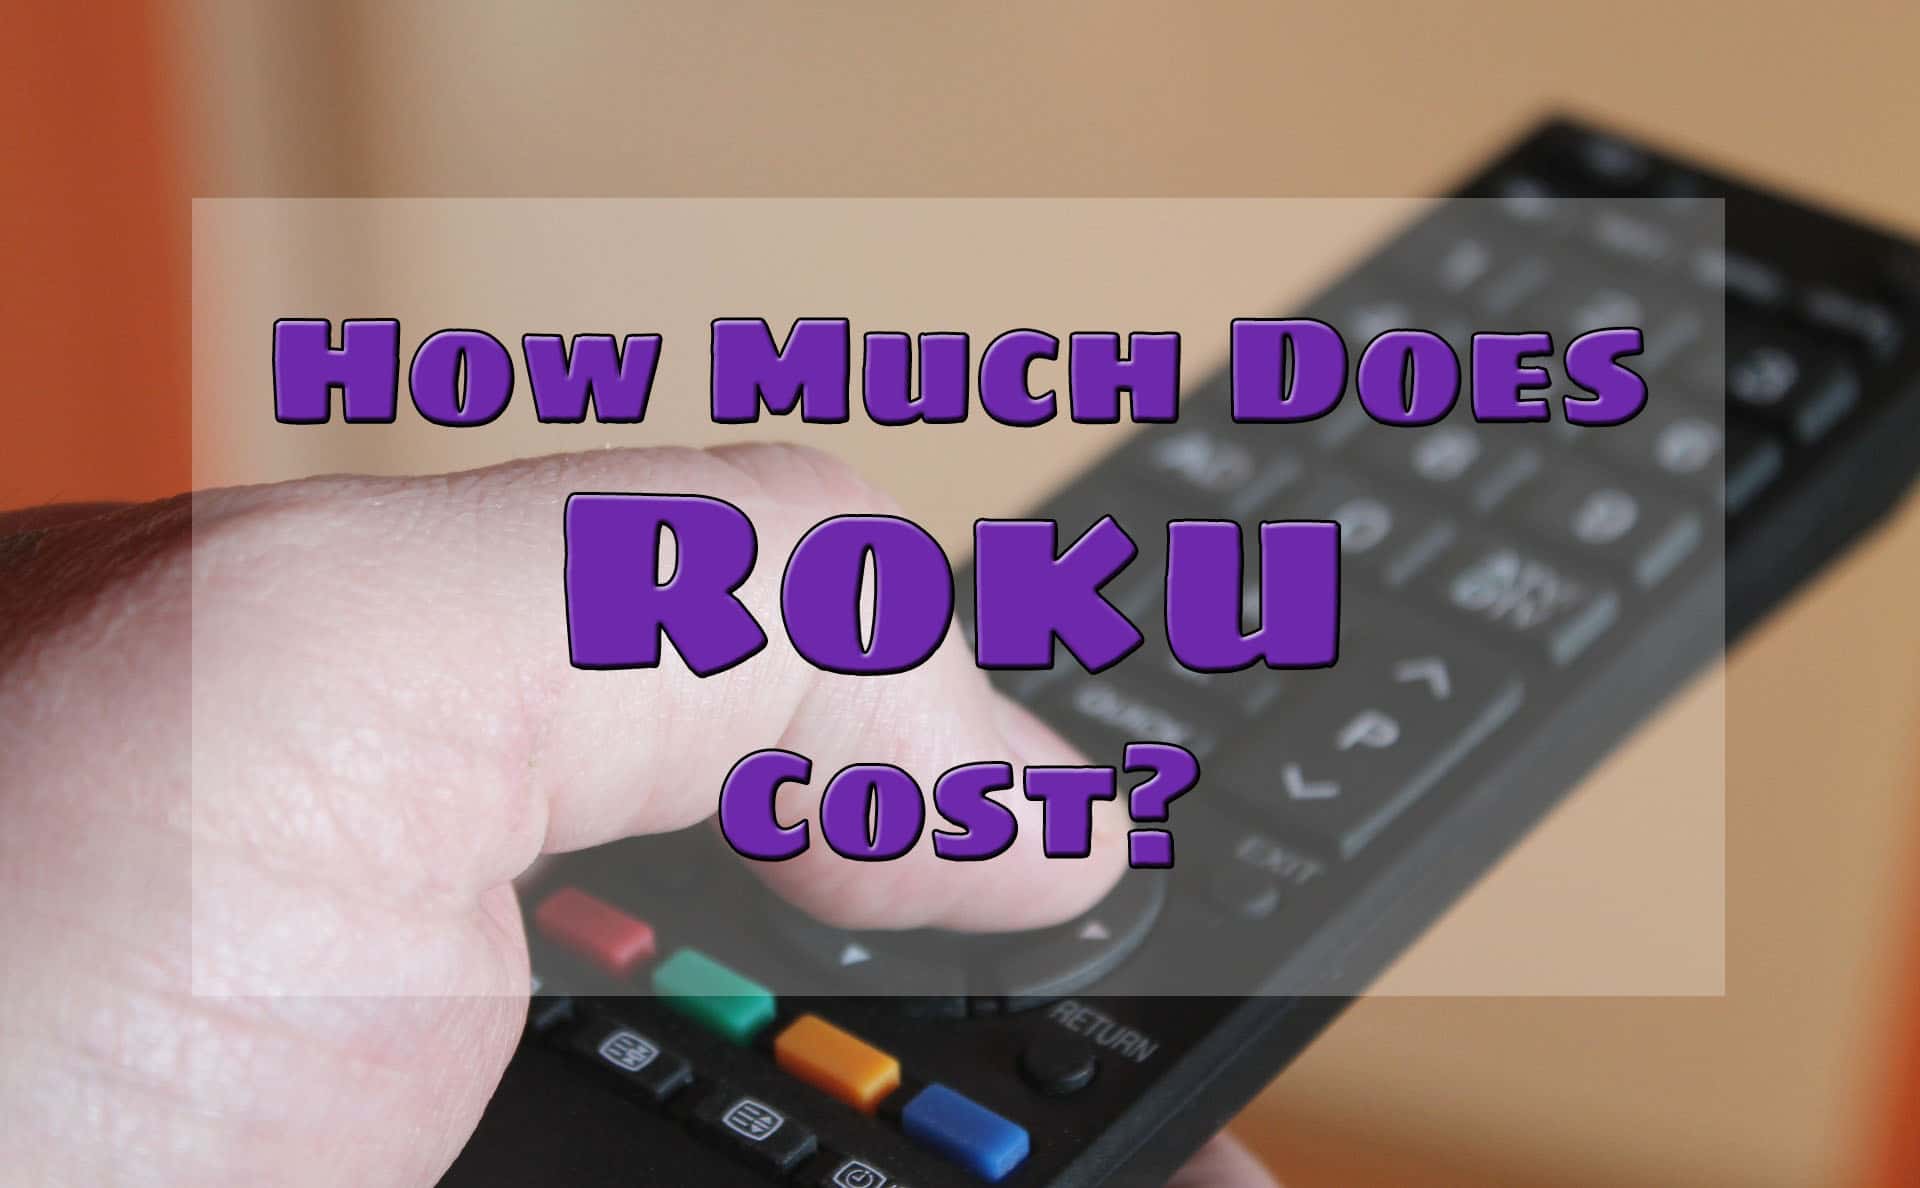 How Much Does Roku Cost